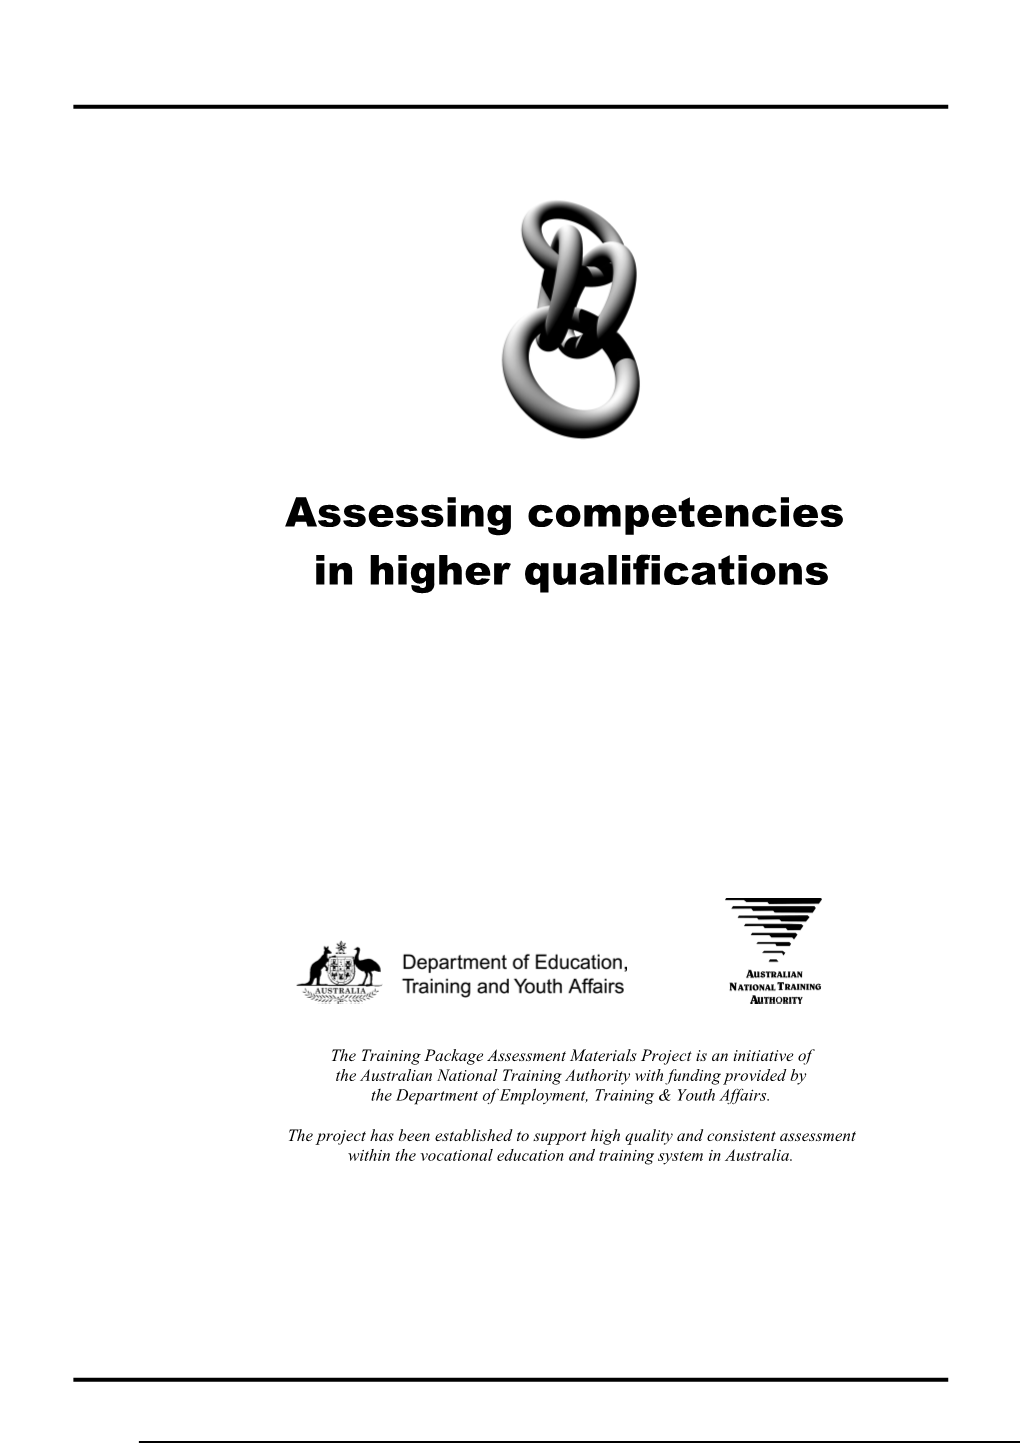 Assessing Competencies in Higher Qualifications